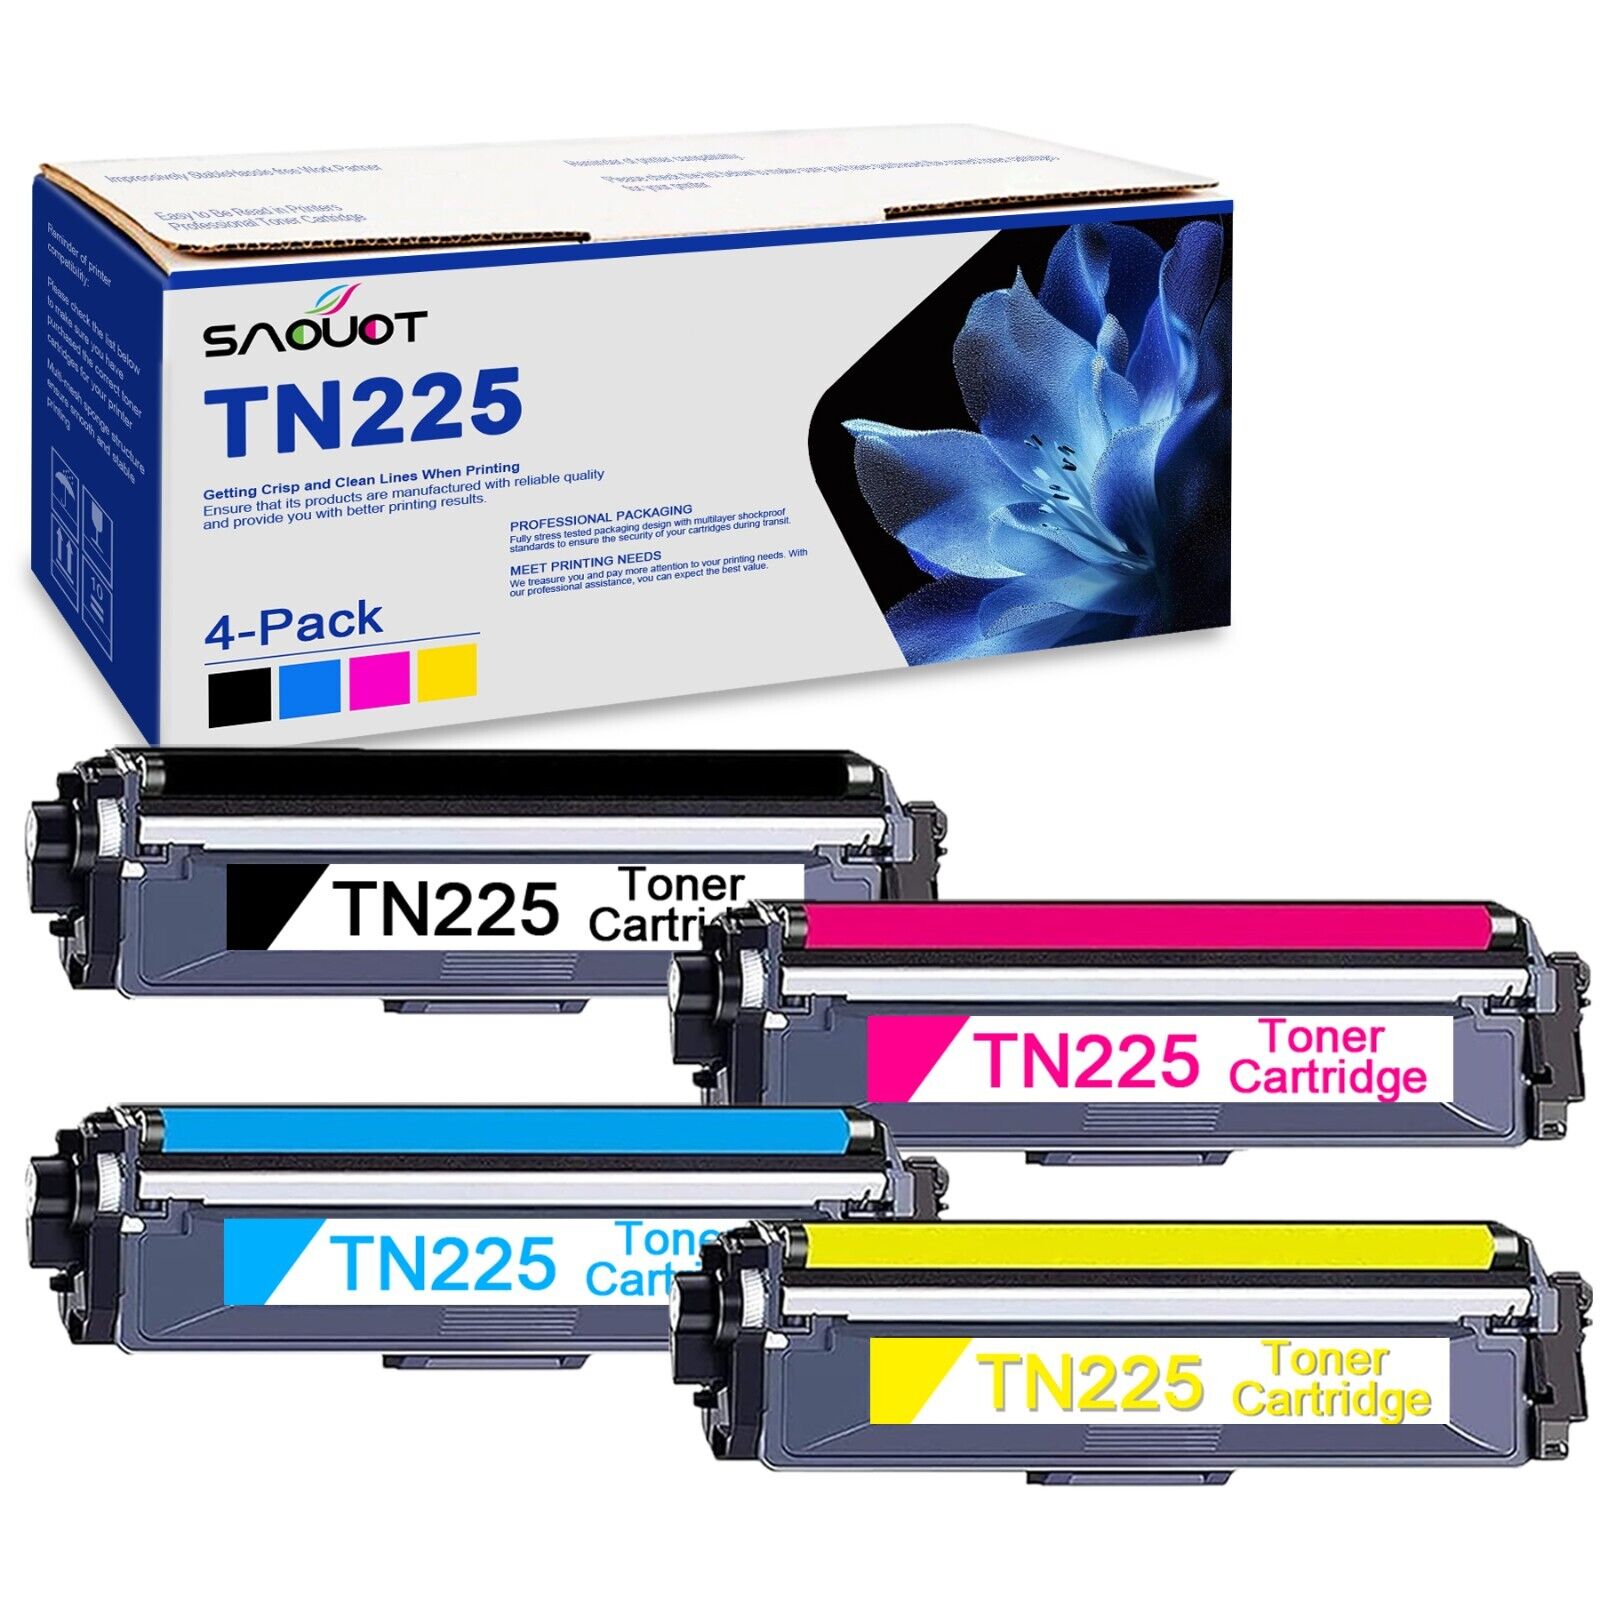 TN225 Toner Cartridge Replacement for Brother 4PK TN-225 MFC-9130CW 3180CDW KCMY